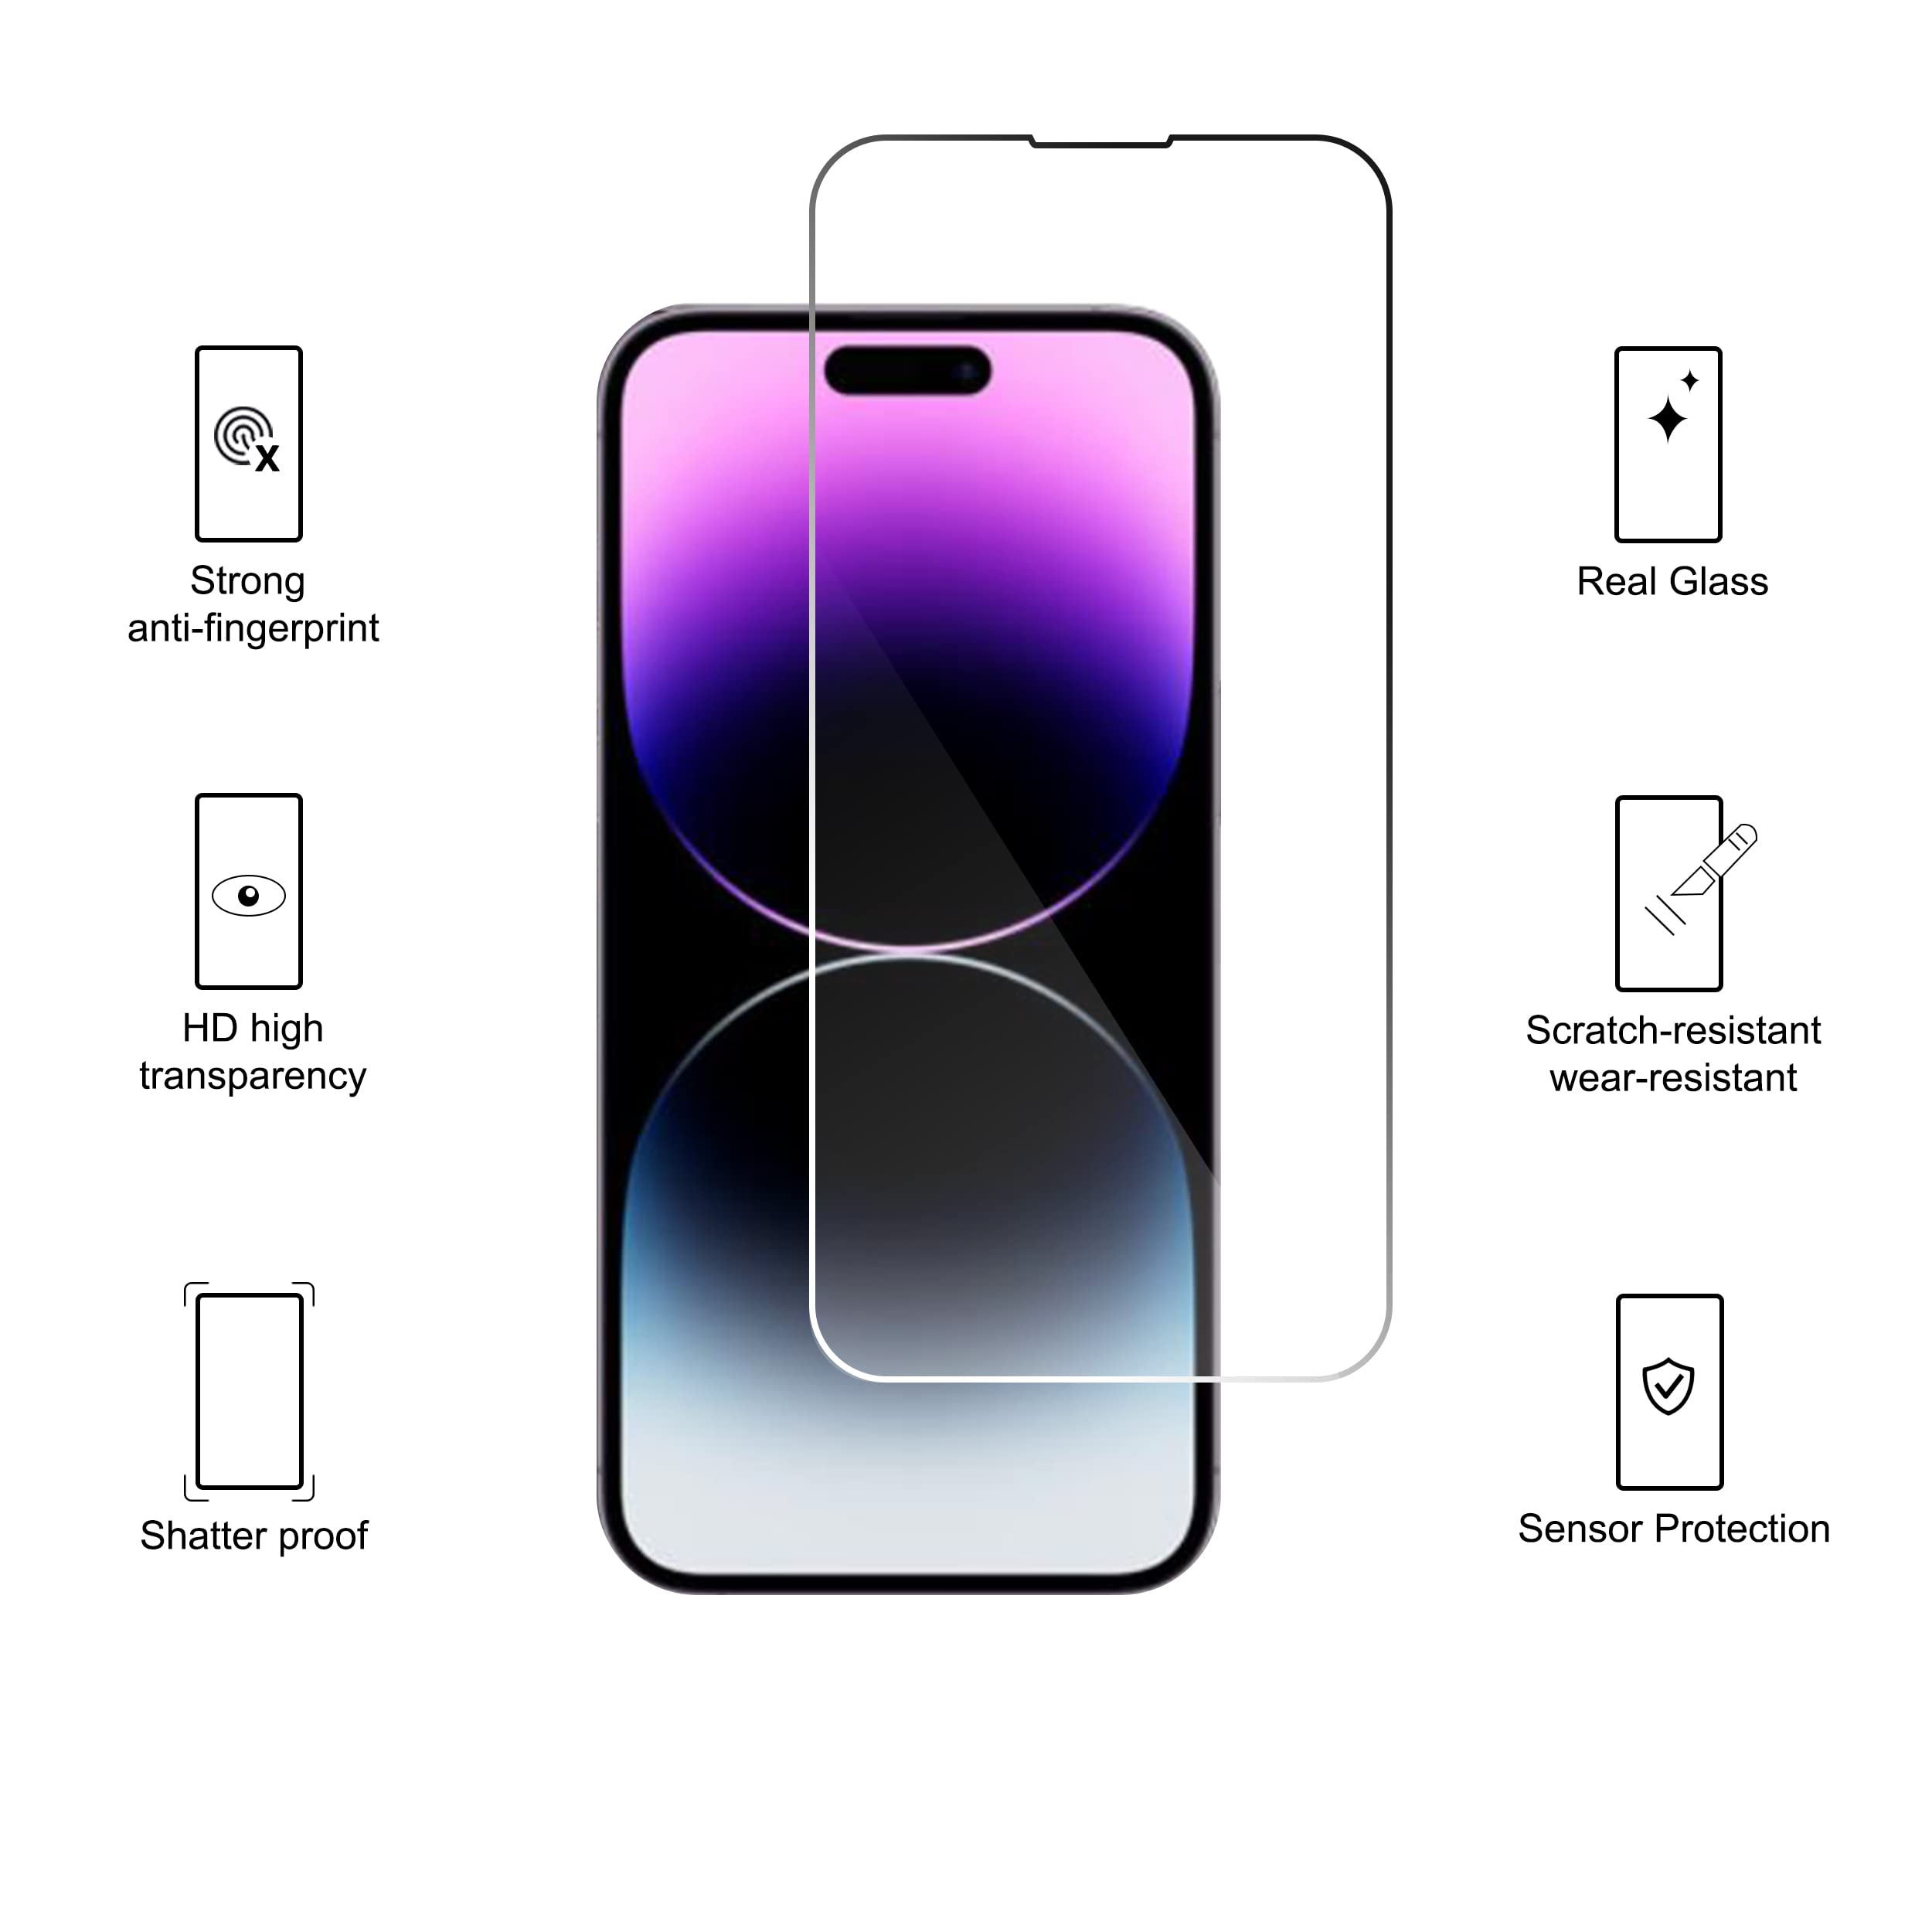 Ailun 3 Pack Screen Protector for iPhone 14 Pro Max[6.7 inch] + 3 Pack Camera Lens Protector,Sensor Protection,Dynamic Island Compatible,Case Friendly Tempered Glass Film,[9H Hardness] - HD